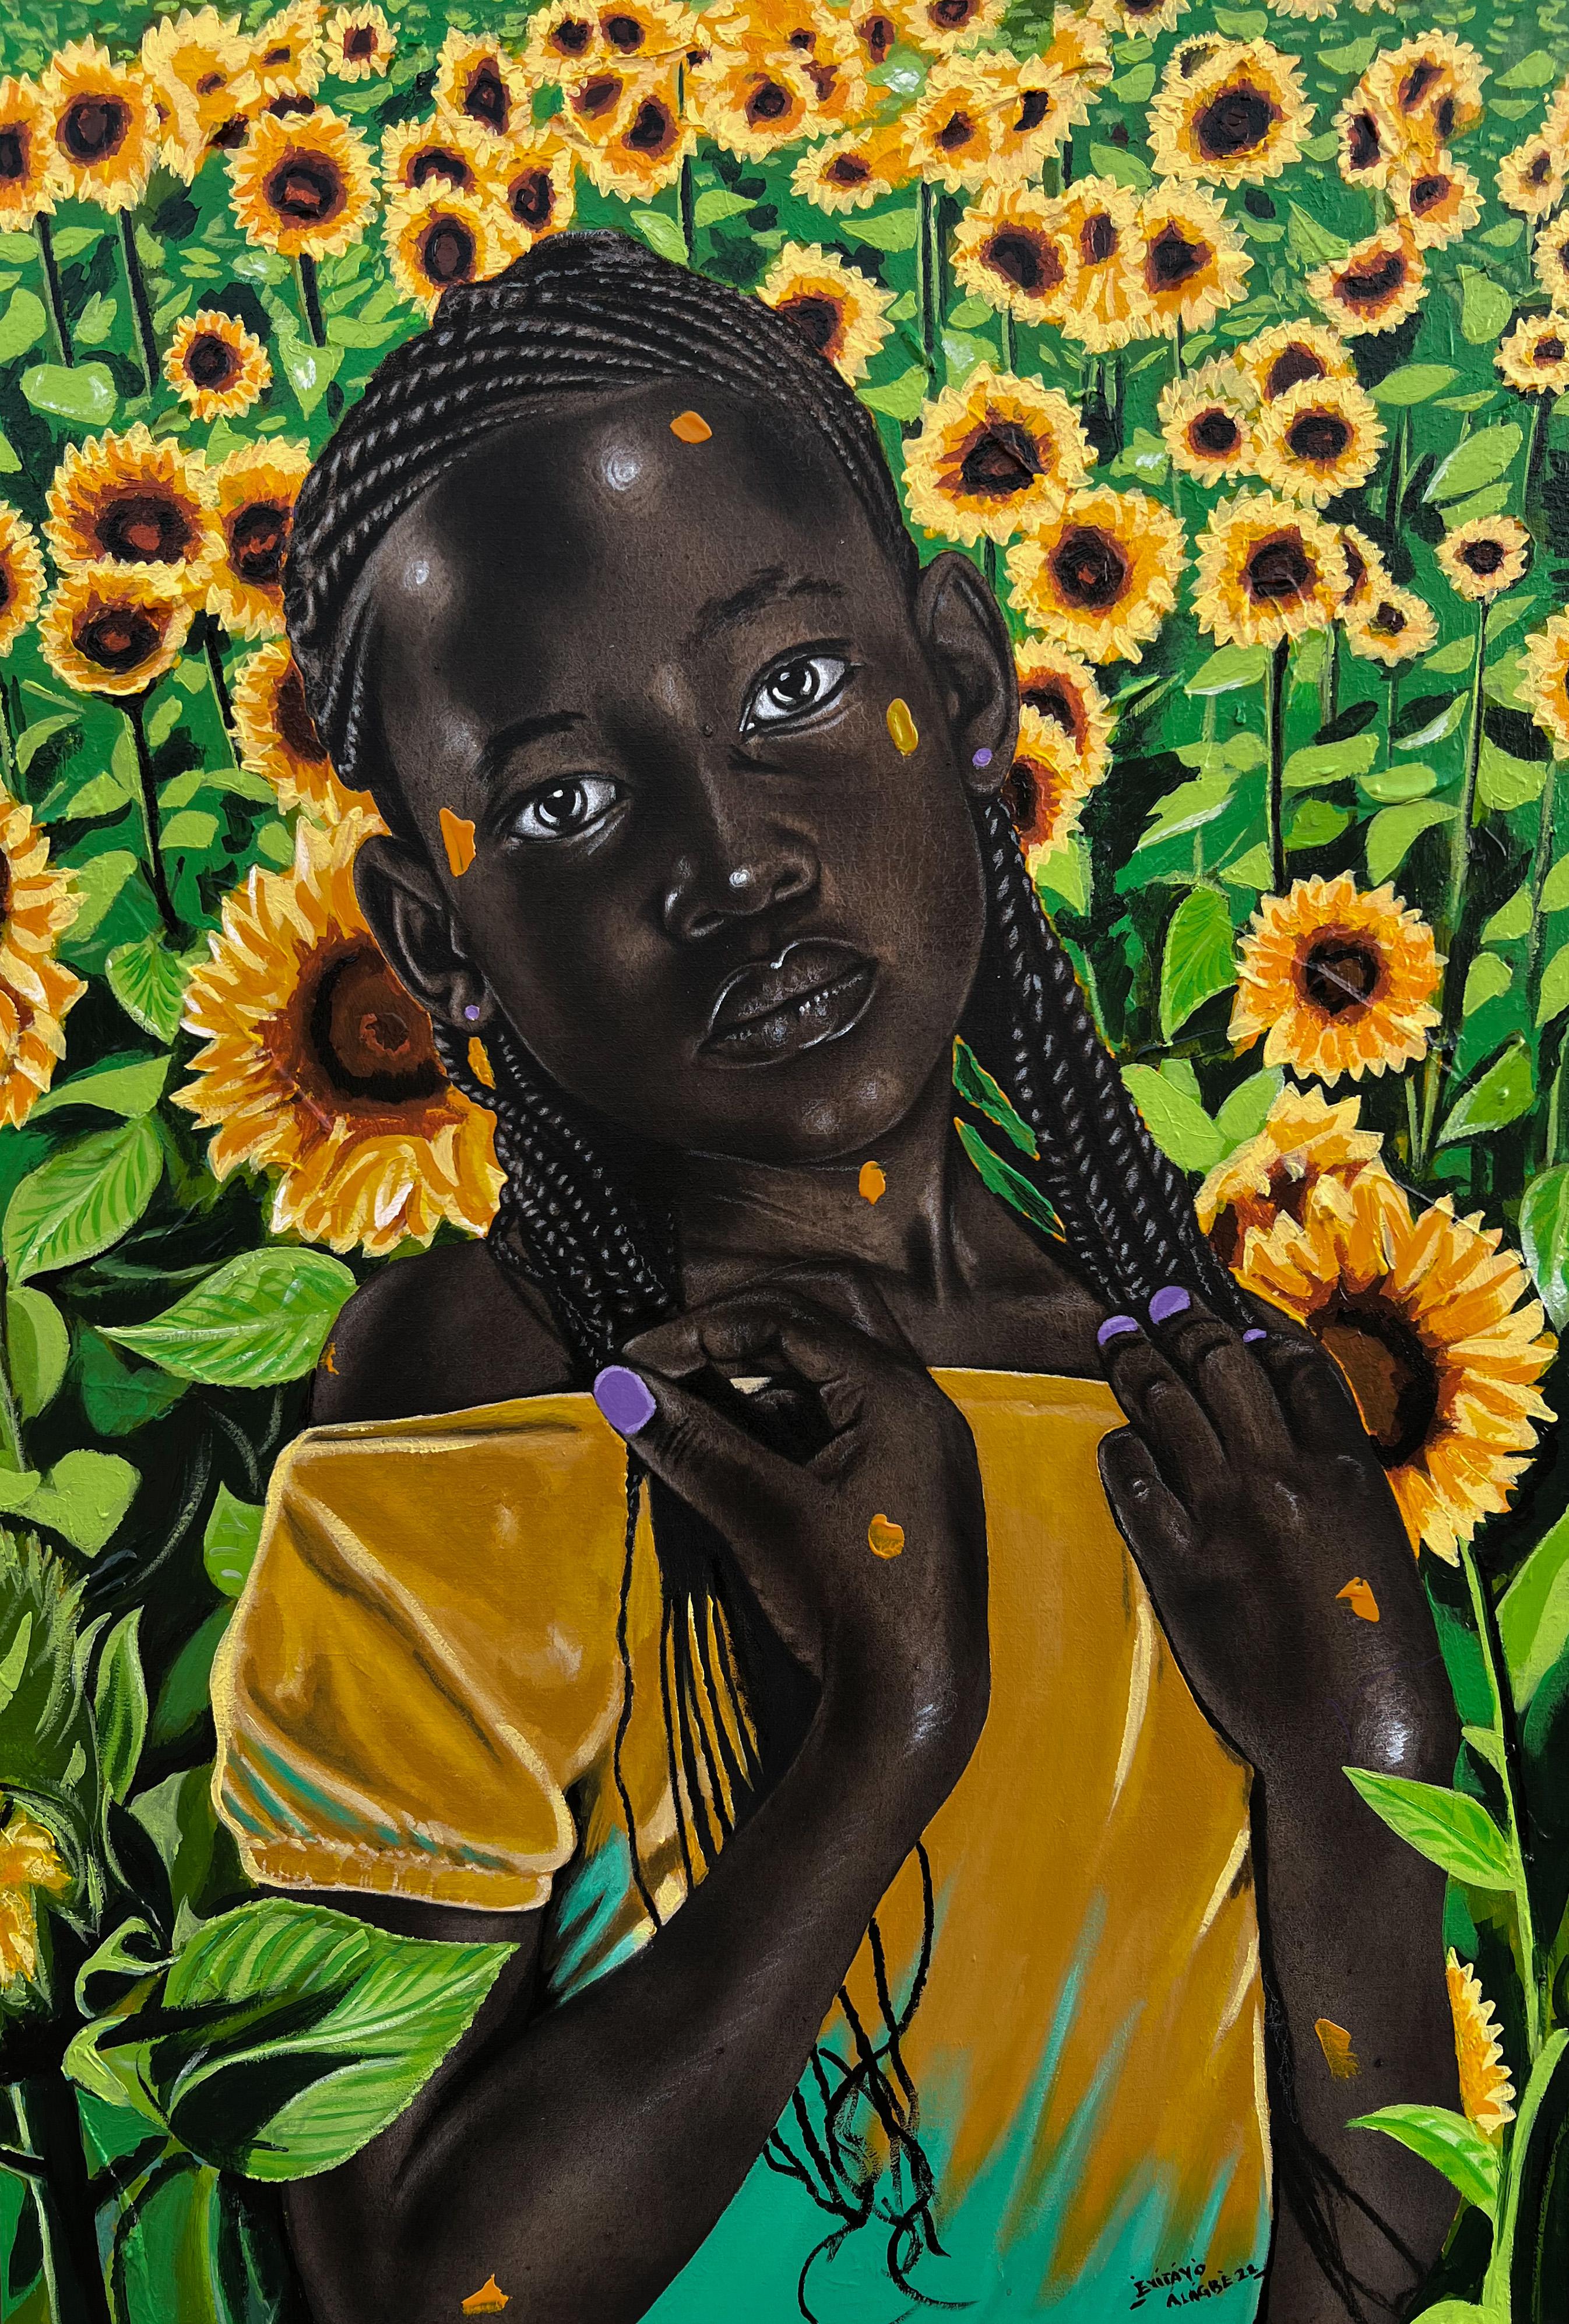 Sunflower Teaches Us So Much About Love - Mixed Media Art by Eyitayo Alagbe 